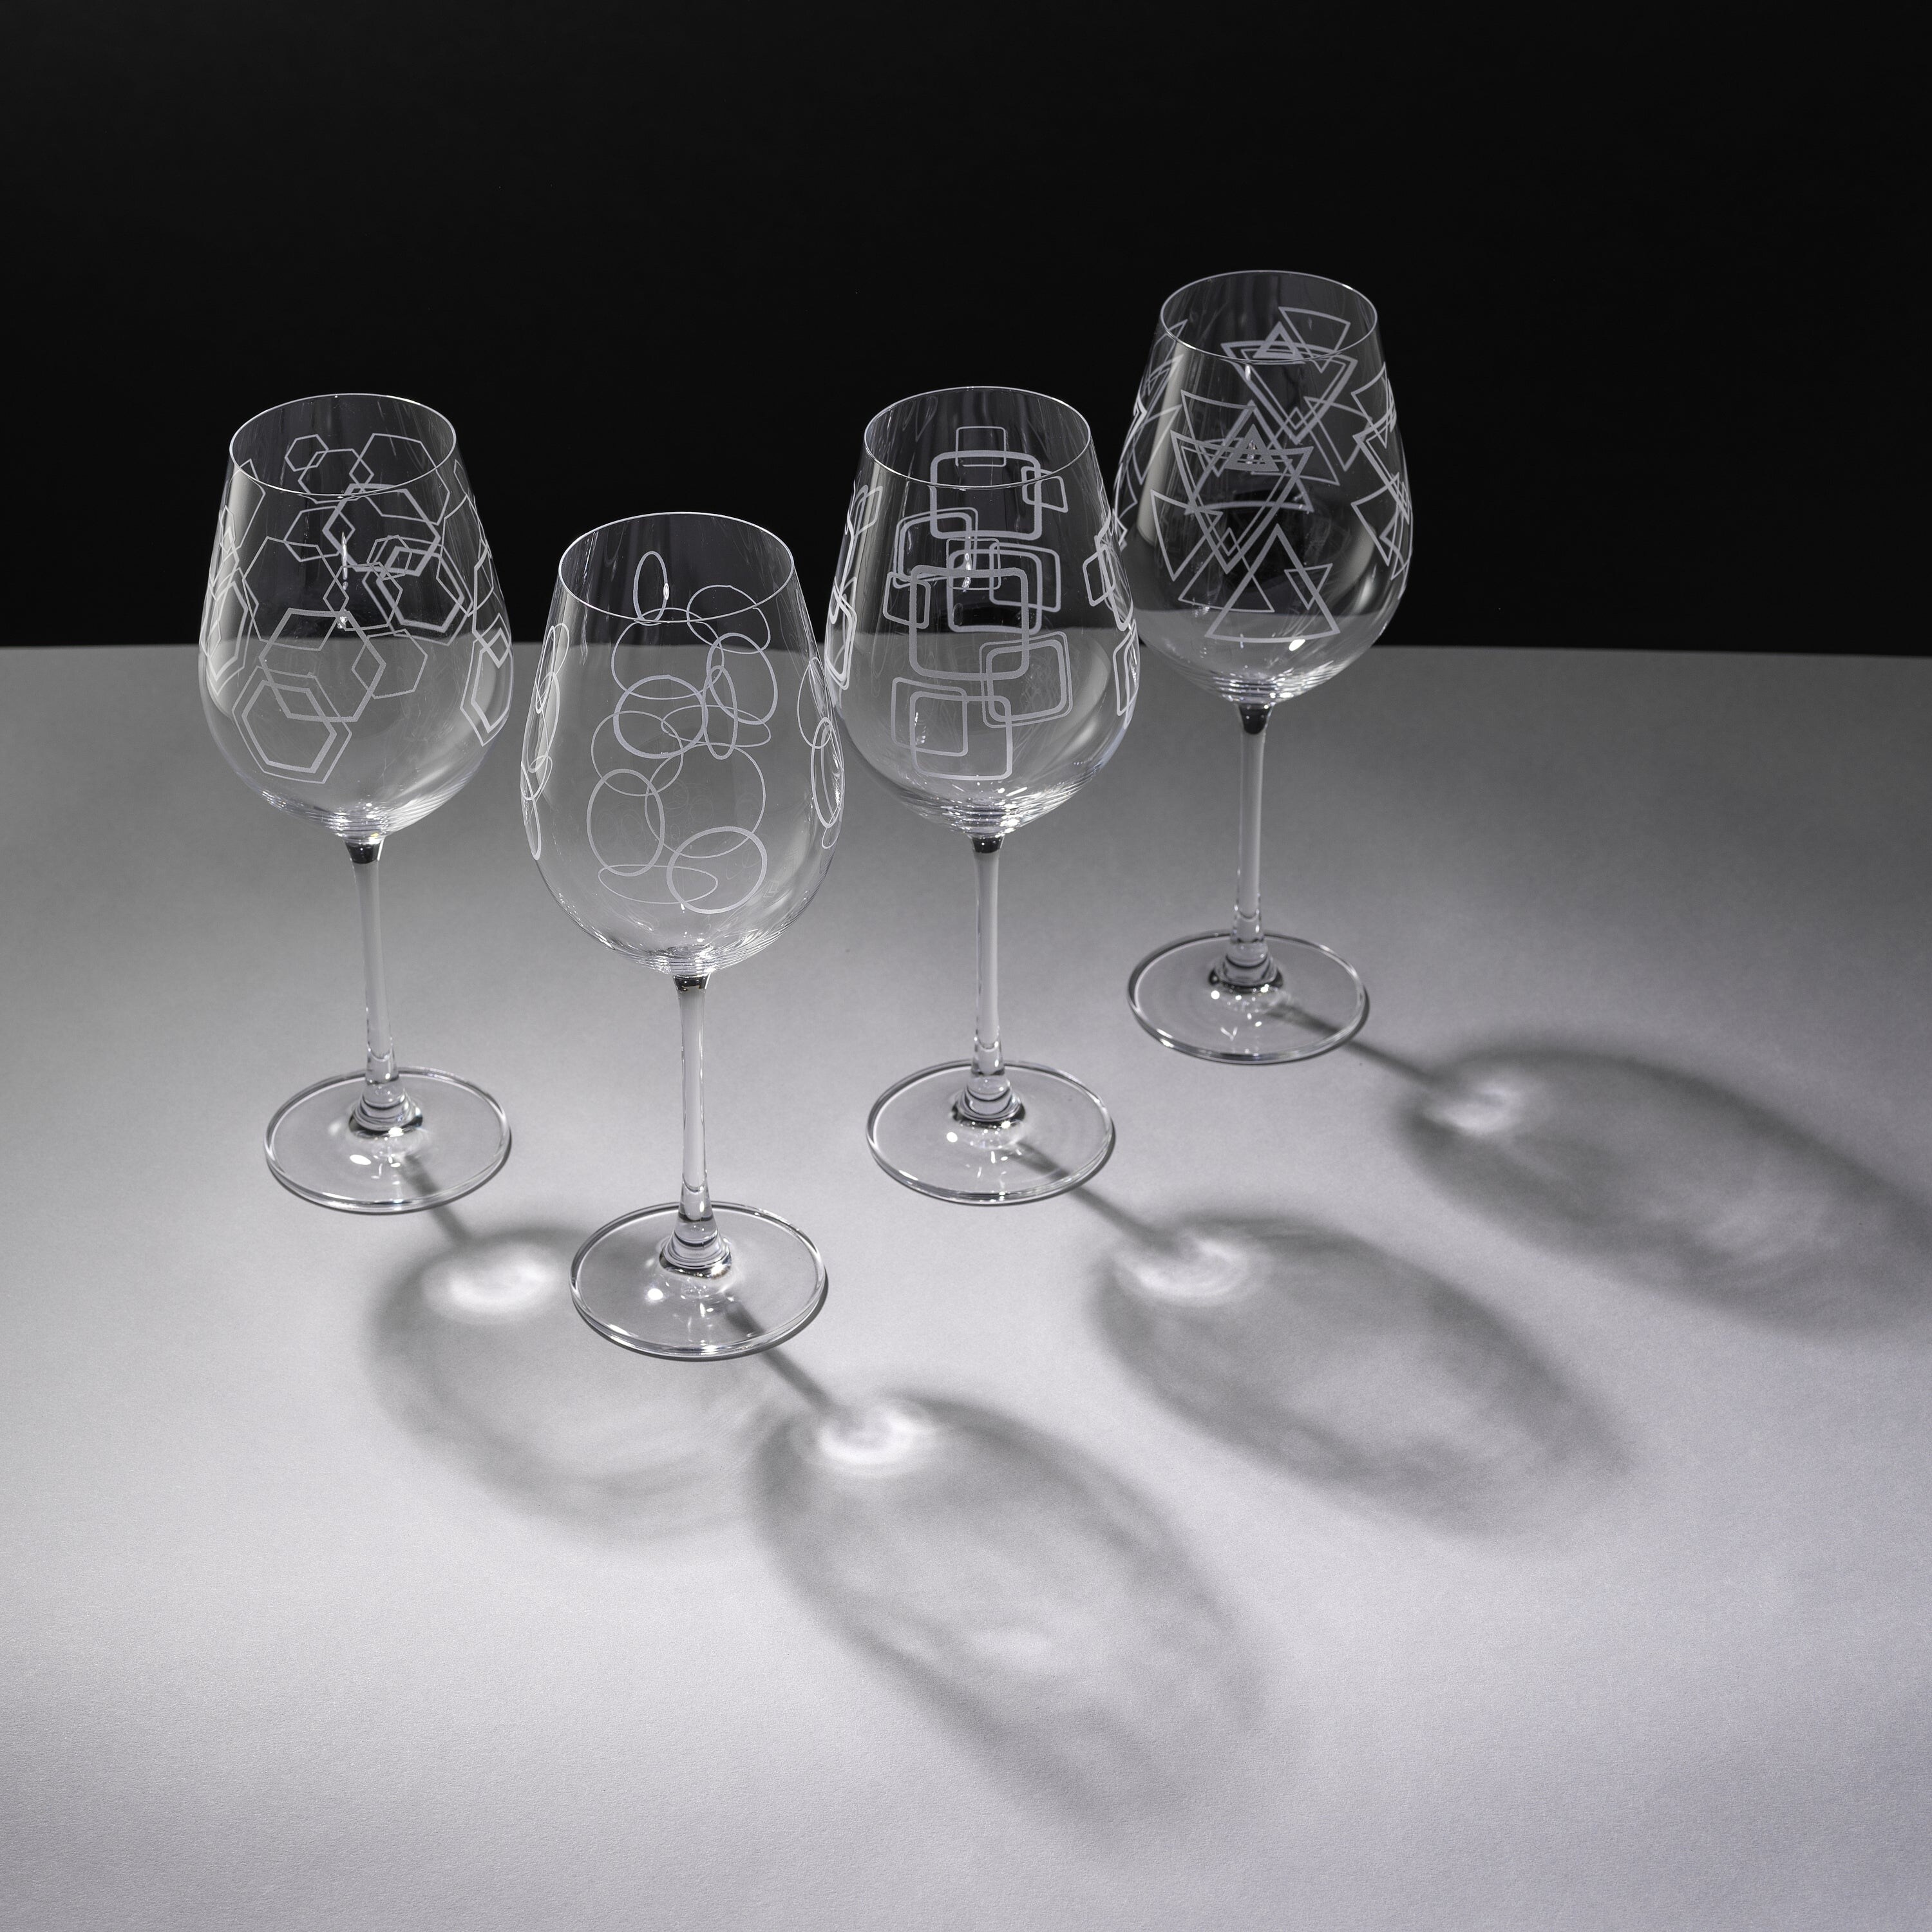 https://ak1.ostkcdn.com/images/products/is/images/direct/940c2b19607a45f8ea86d15e20d78aadecc4e91f/JoyJolt-Geo-Crystal-White-Wine-Glasses---14-oz---Set-of-4.jpg